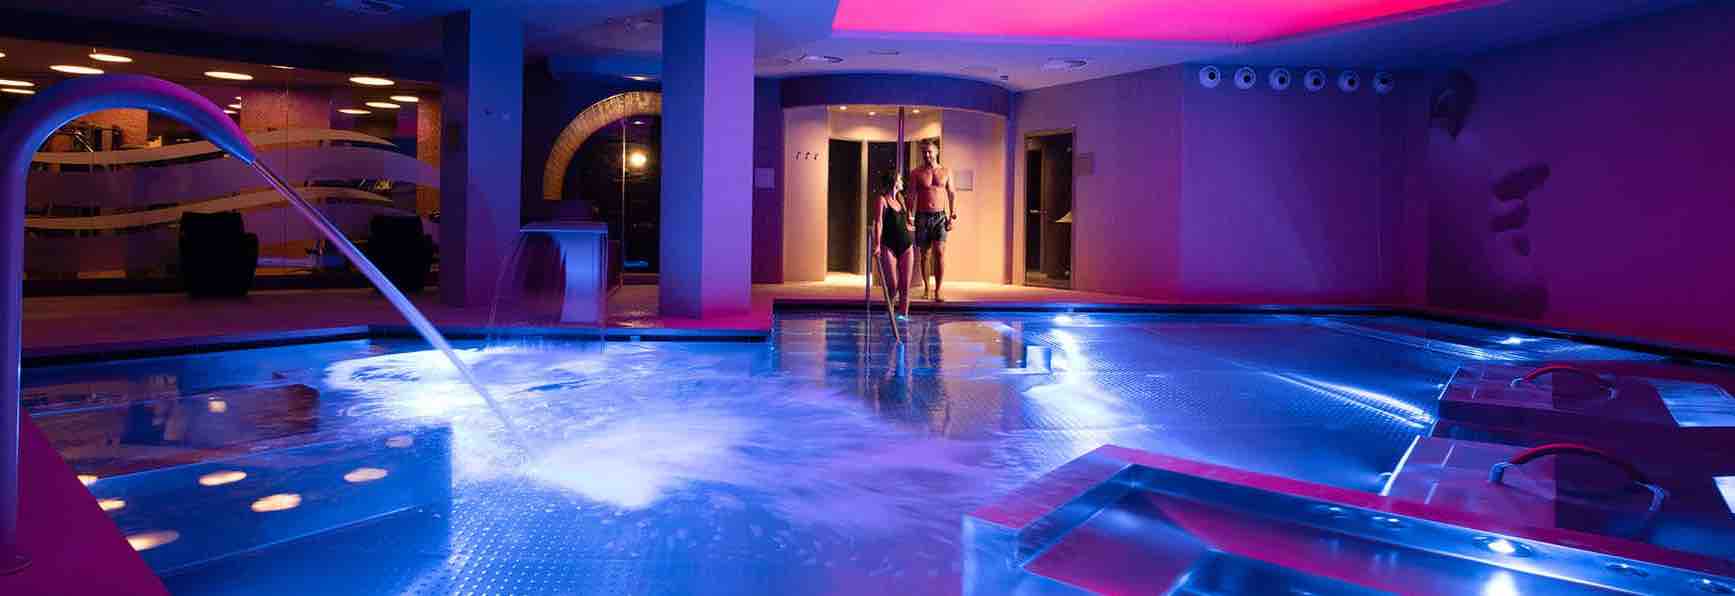 A wellness center room with chromotherapy lights and a couple going down the stairs to the heated pool